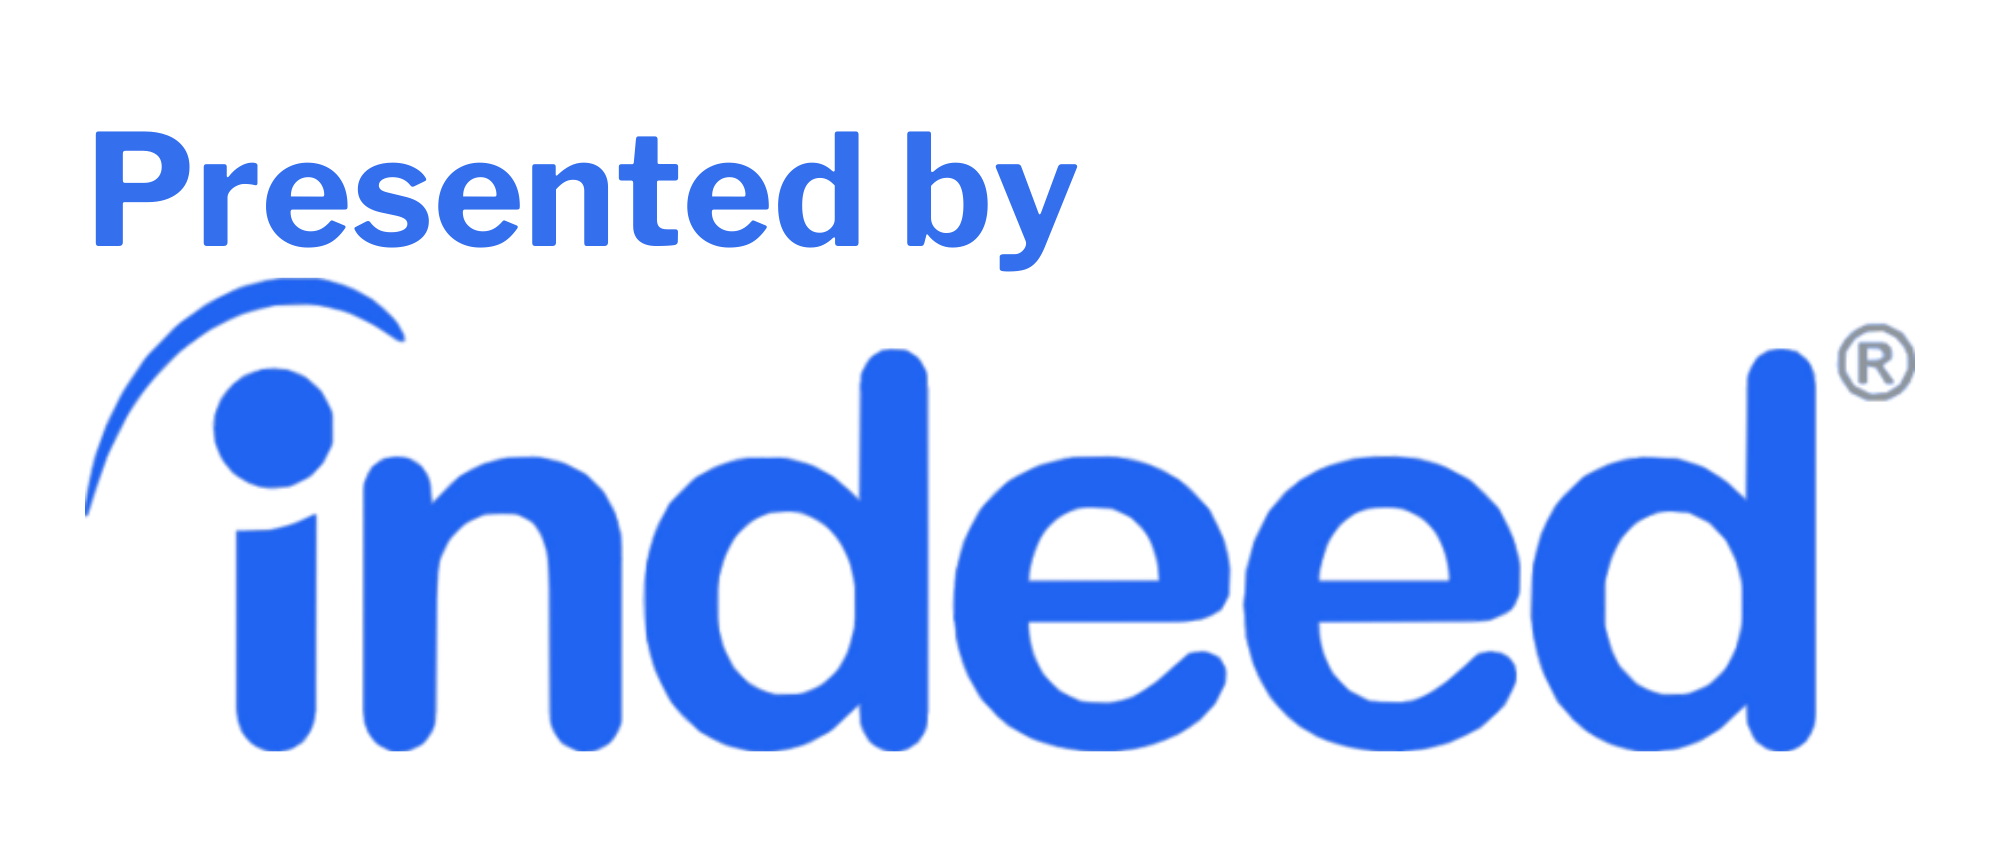 Presented by indeed